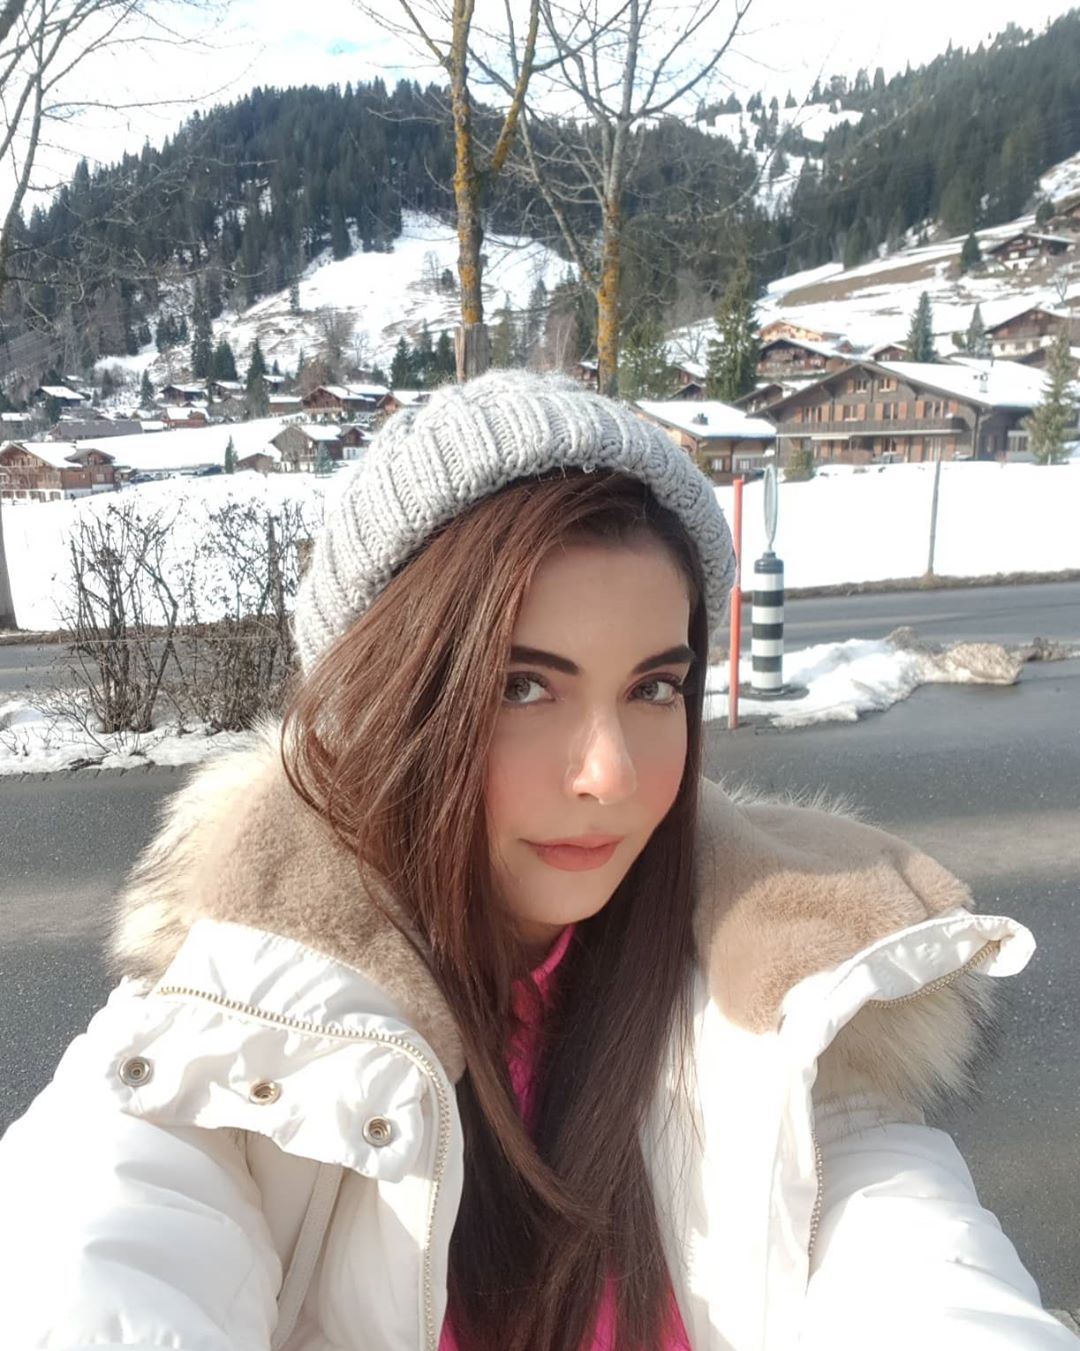 Nida and Yasir Nawaz New Pictures from Switzerland